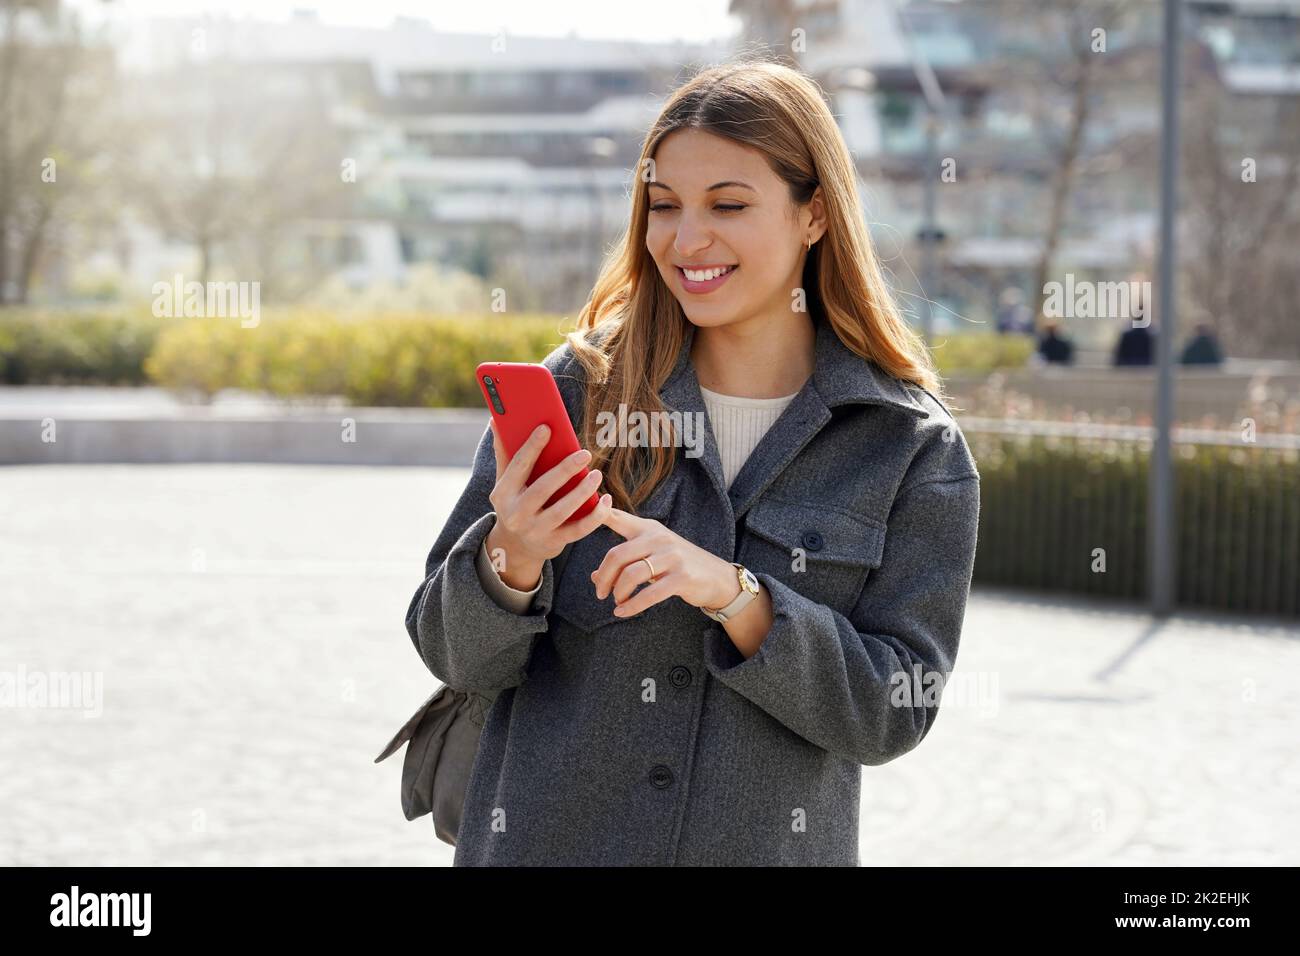 Medium shot of young smiling woman using cellphone in the street on sunny day Stock Photo